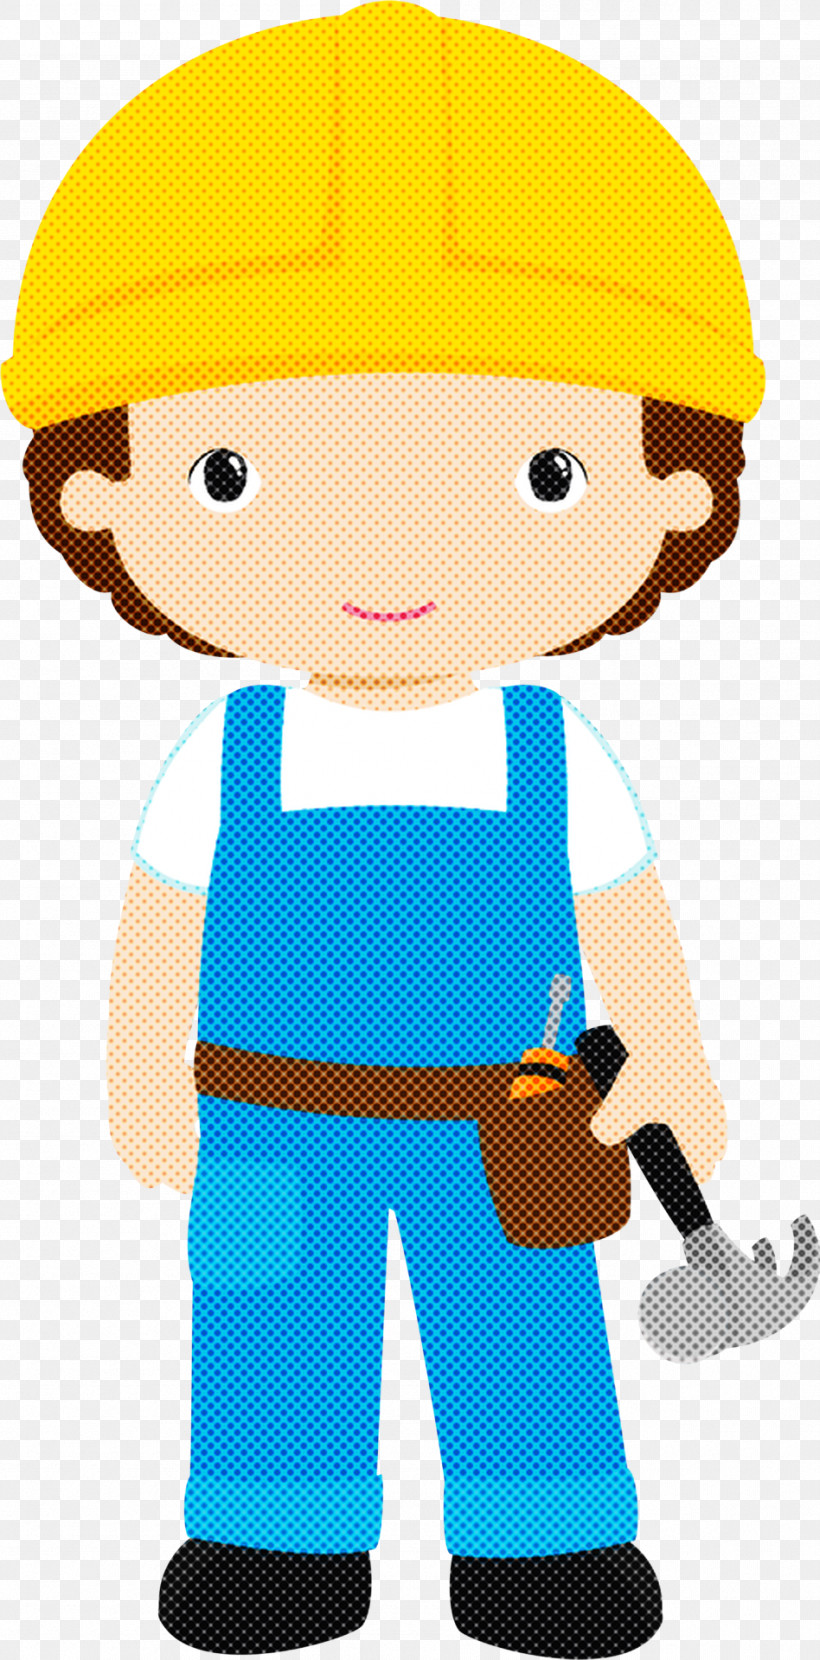 Cartoon Construction Worker Child, PNG, 948x1920px, Cartoon, Child, Construction Worker Download Free